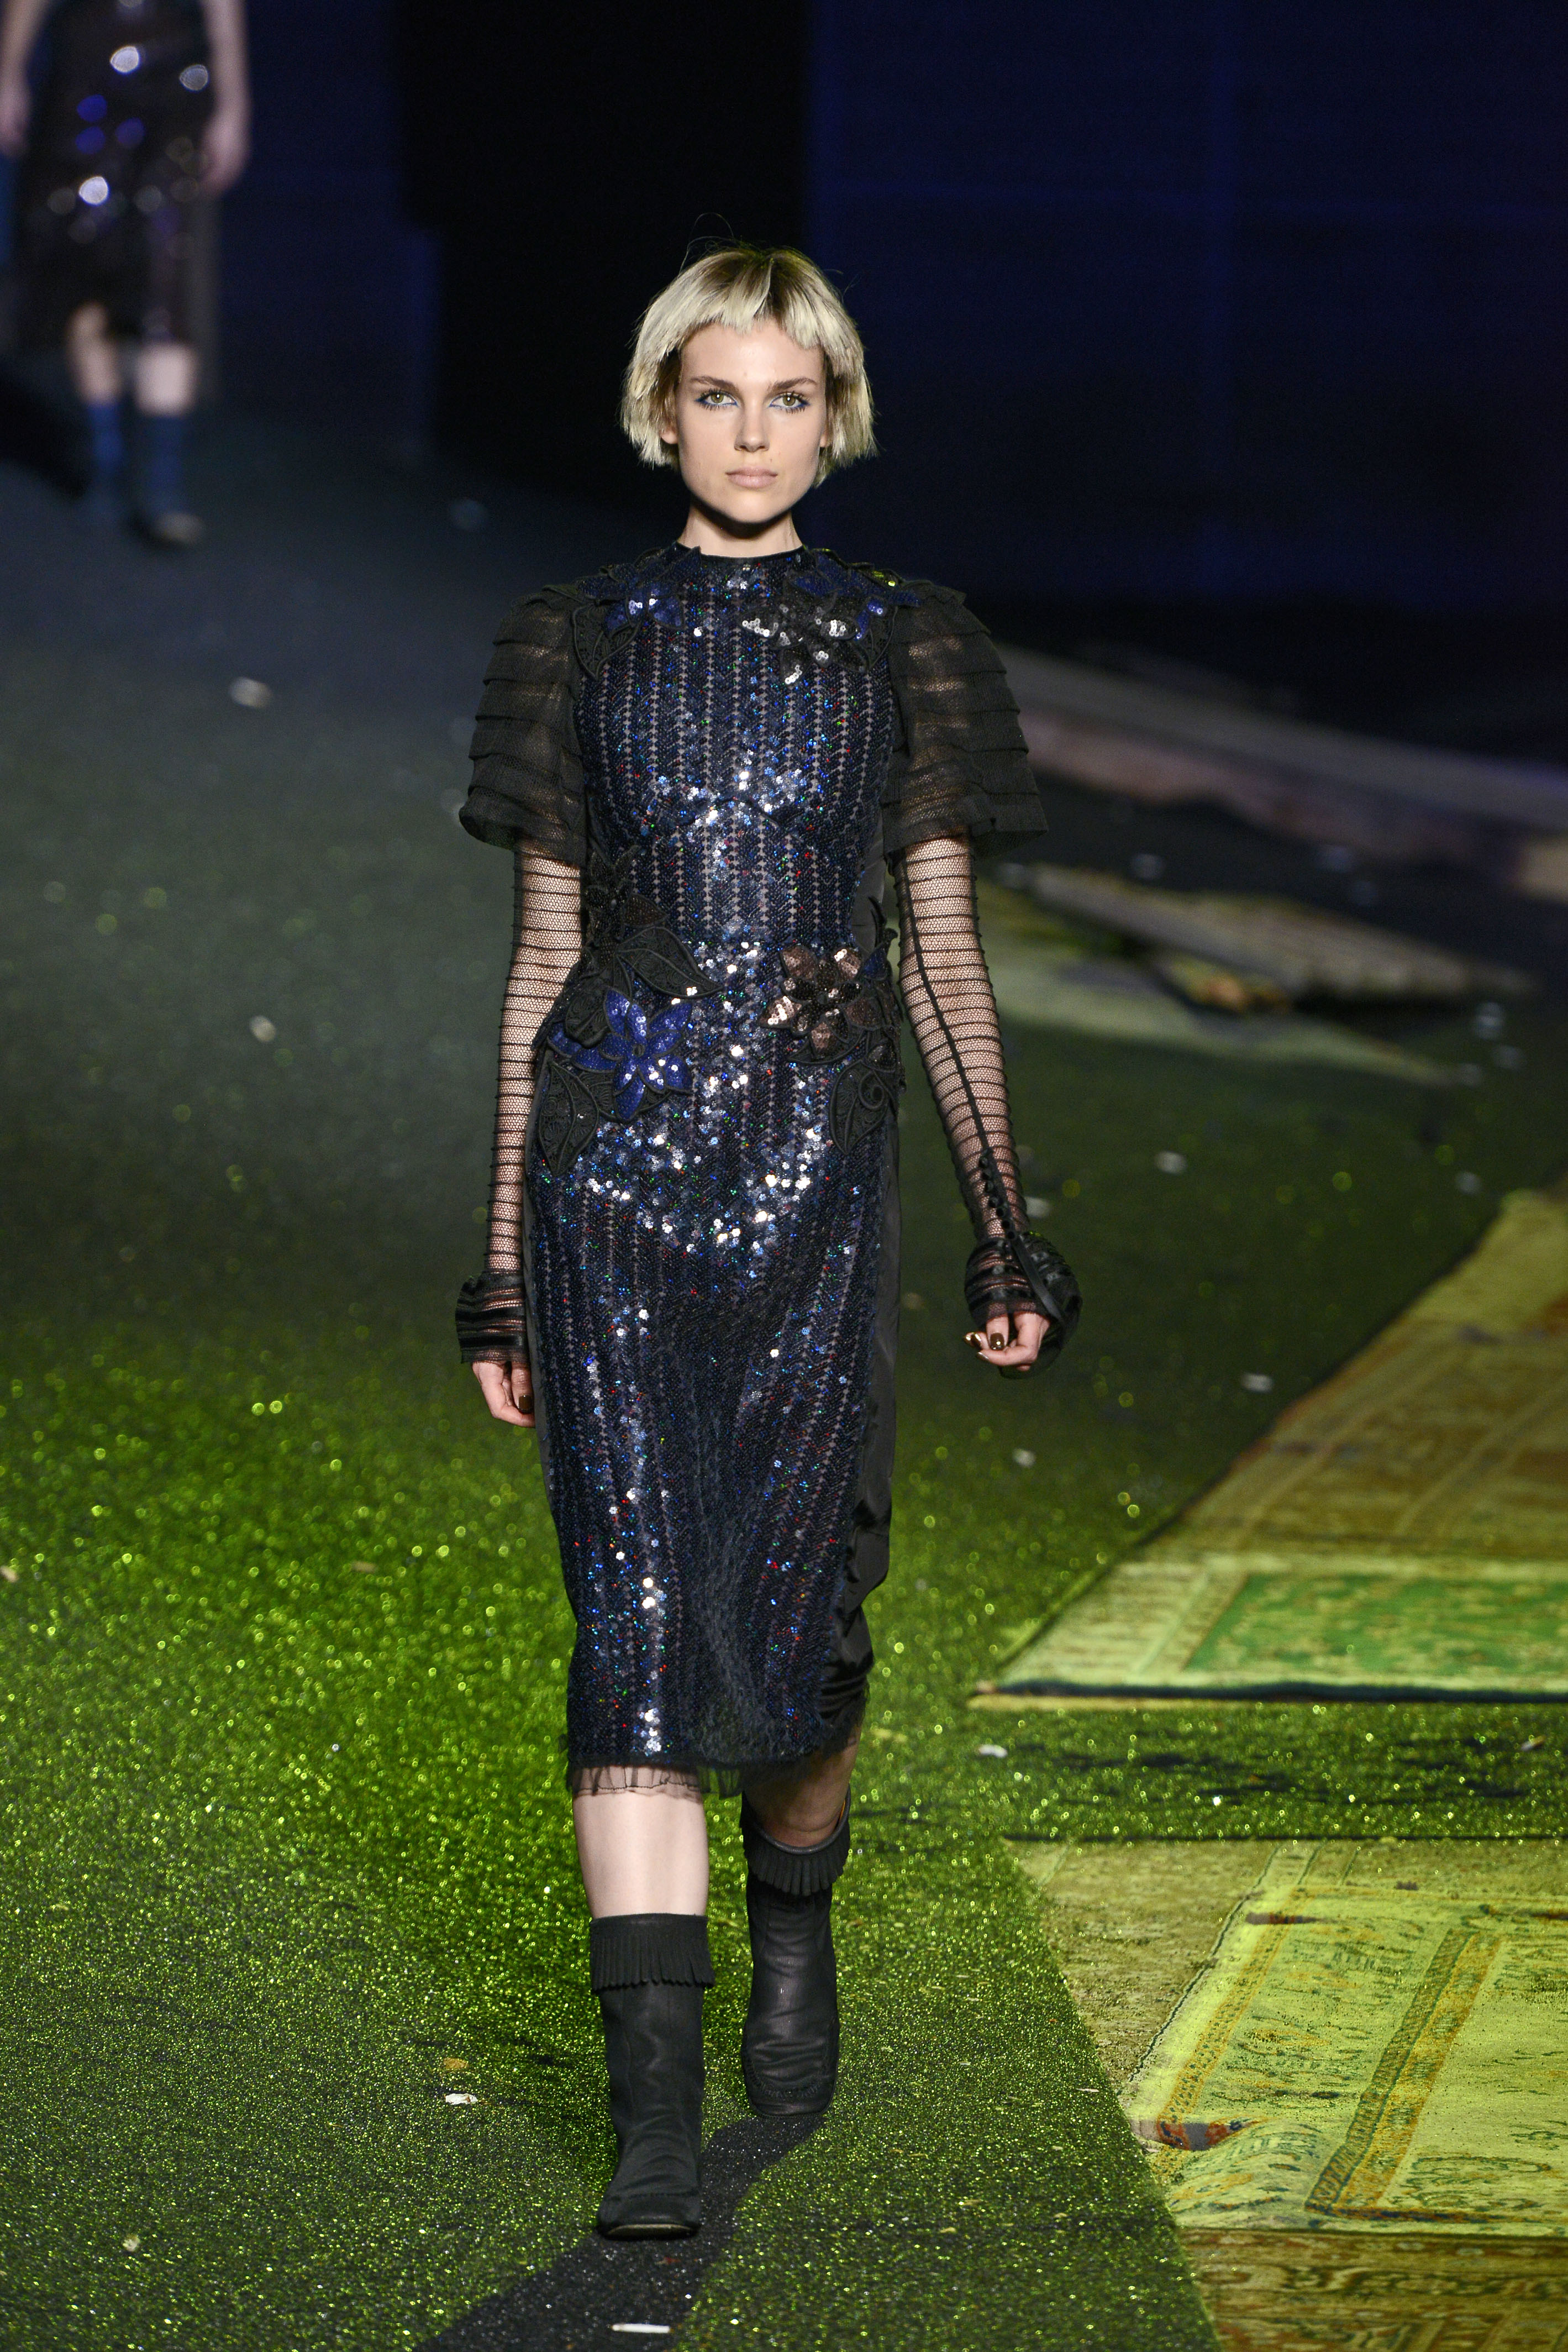 MARC_JACOBS  Ready to wear spring summer 2014_New York september 2013